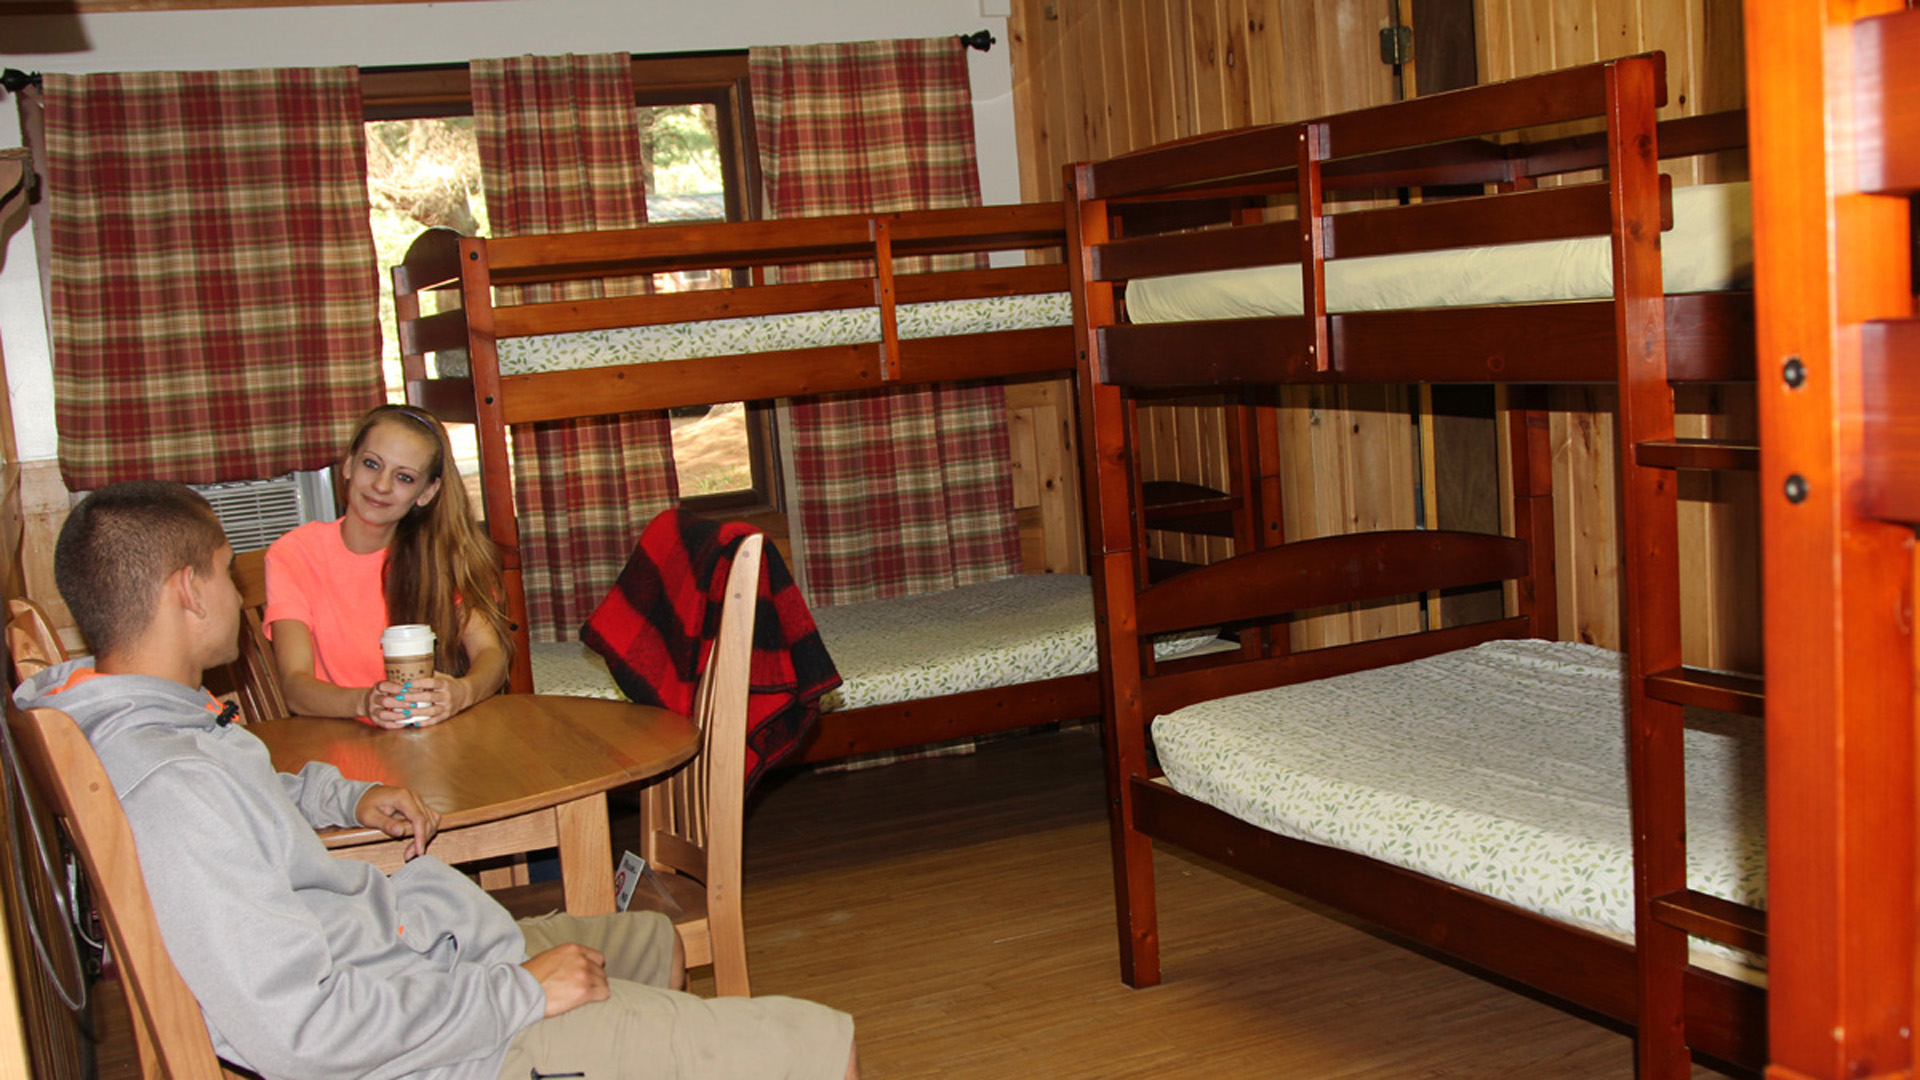 bunk beds in one of our bunkhouses